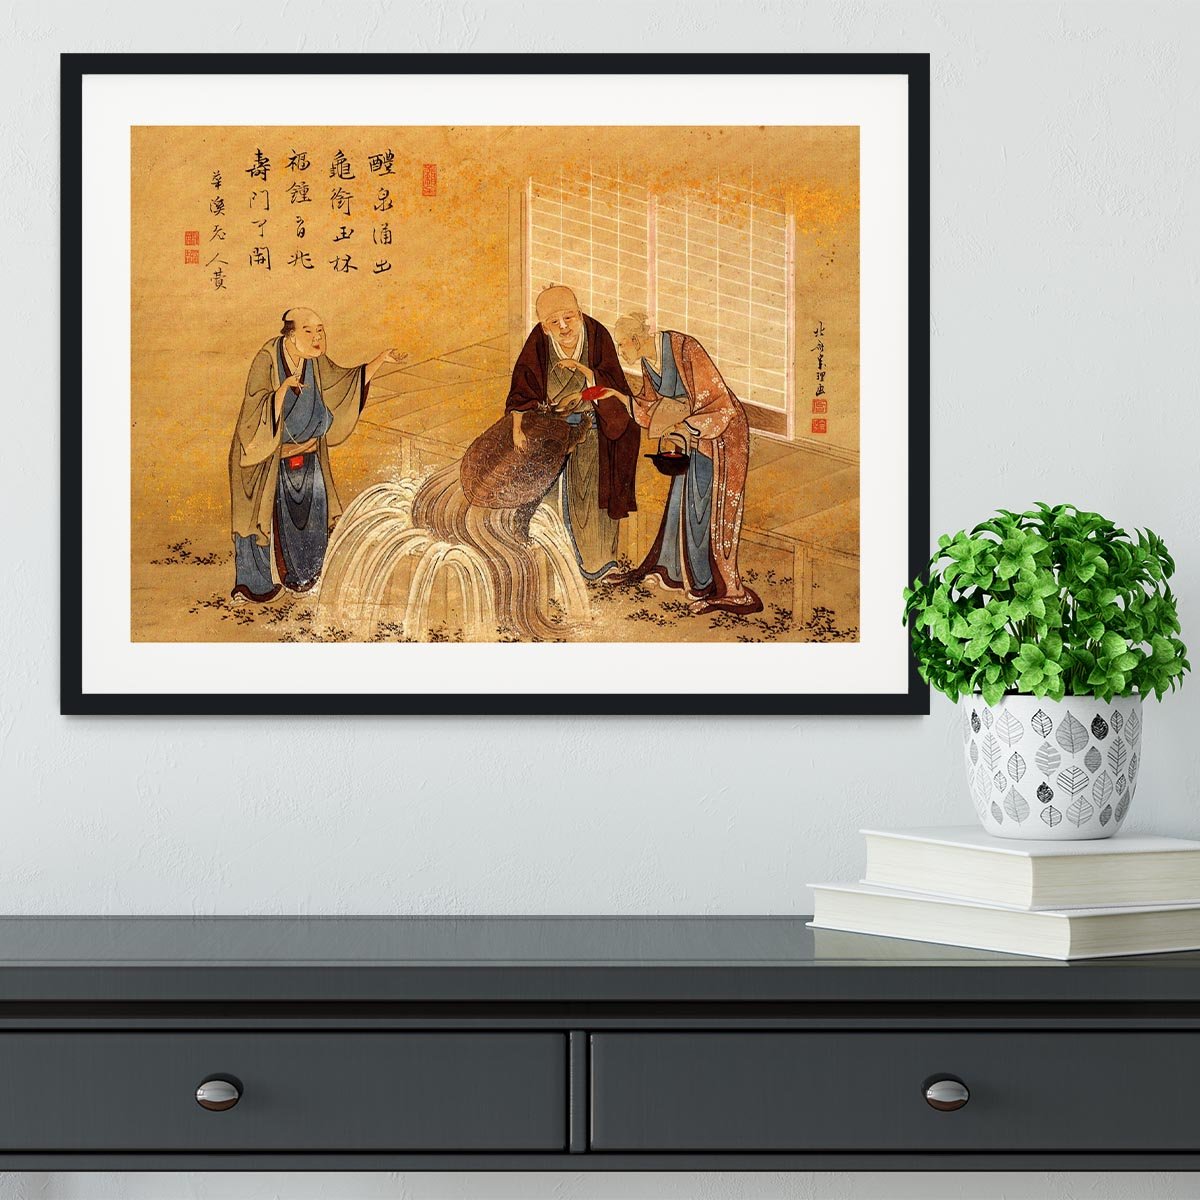 The thouthand years turtle by Hokusai Framed Print - Canvas Art Rocks - 1